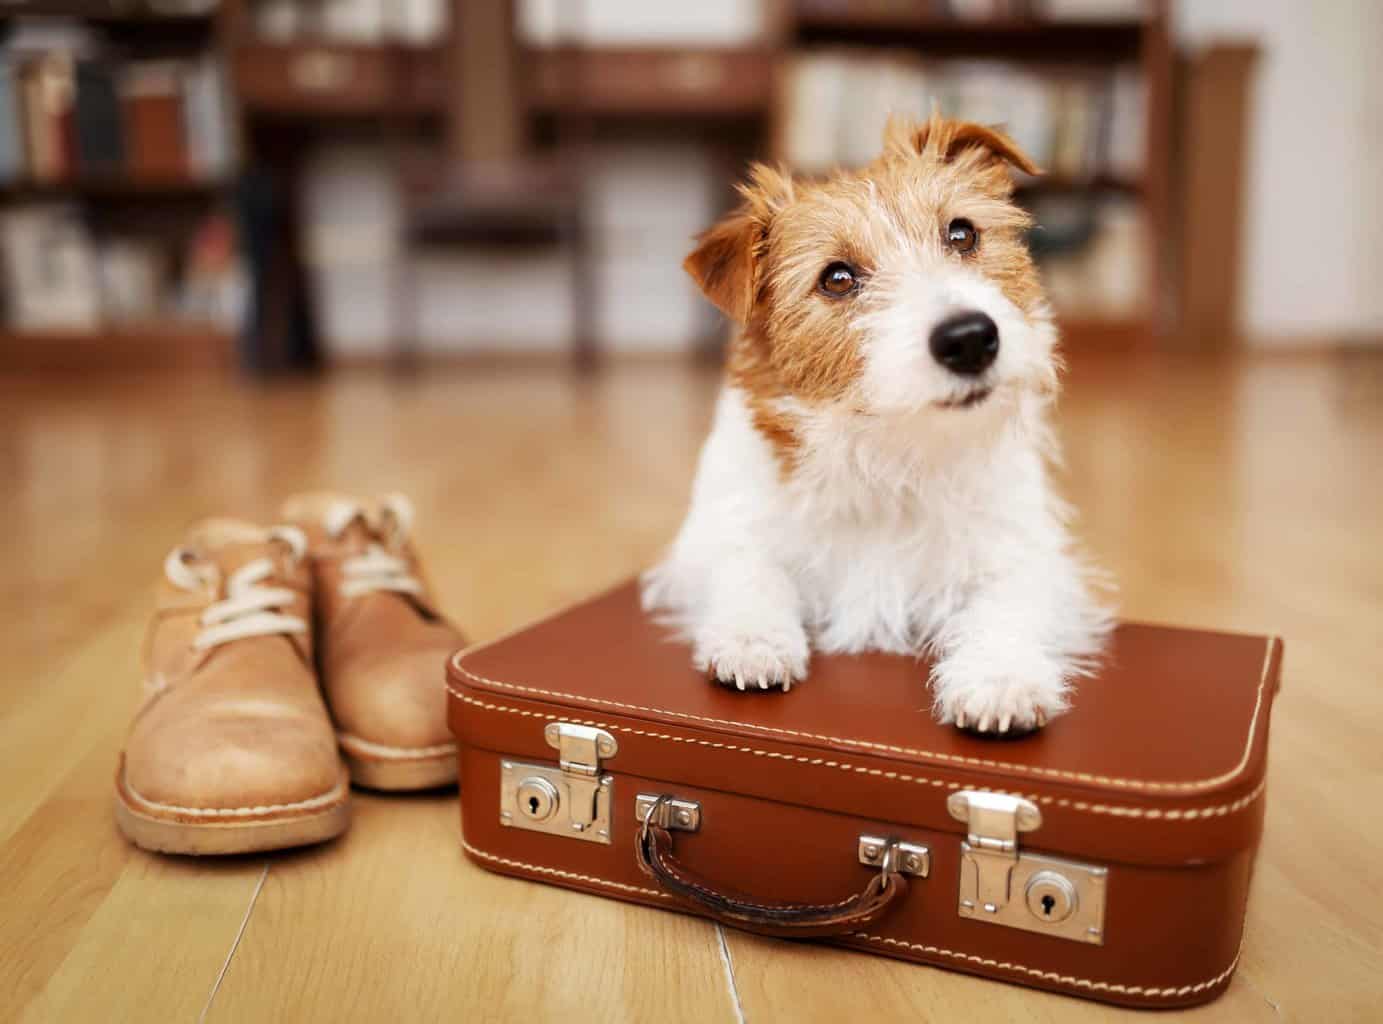 Jack Russell Terrier sits on suitcase. For your dog's first hotel stay, choose a dog-friendly hotel, book a first-floor room, and plan to use the dog's crate and favorite treats.